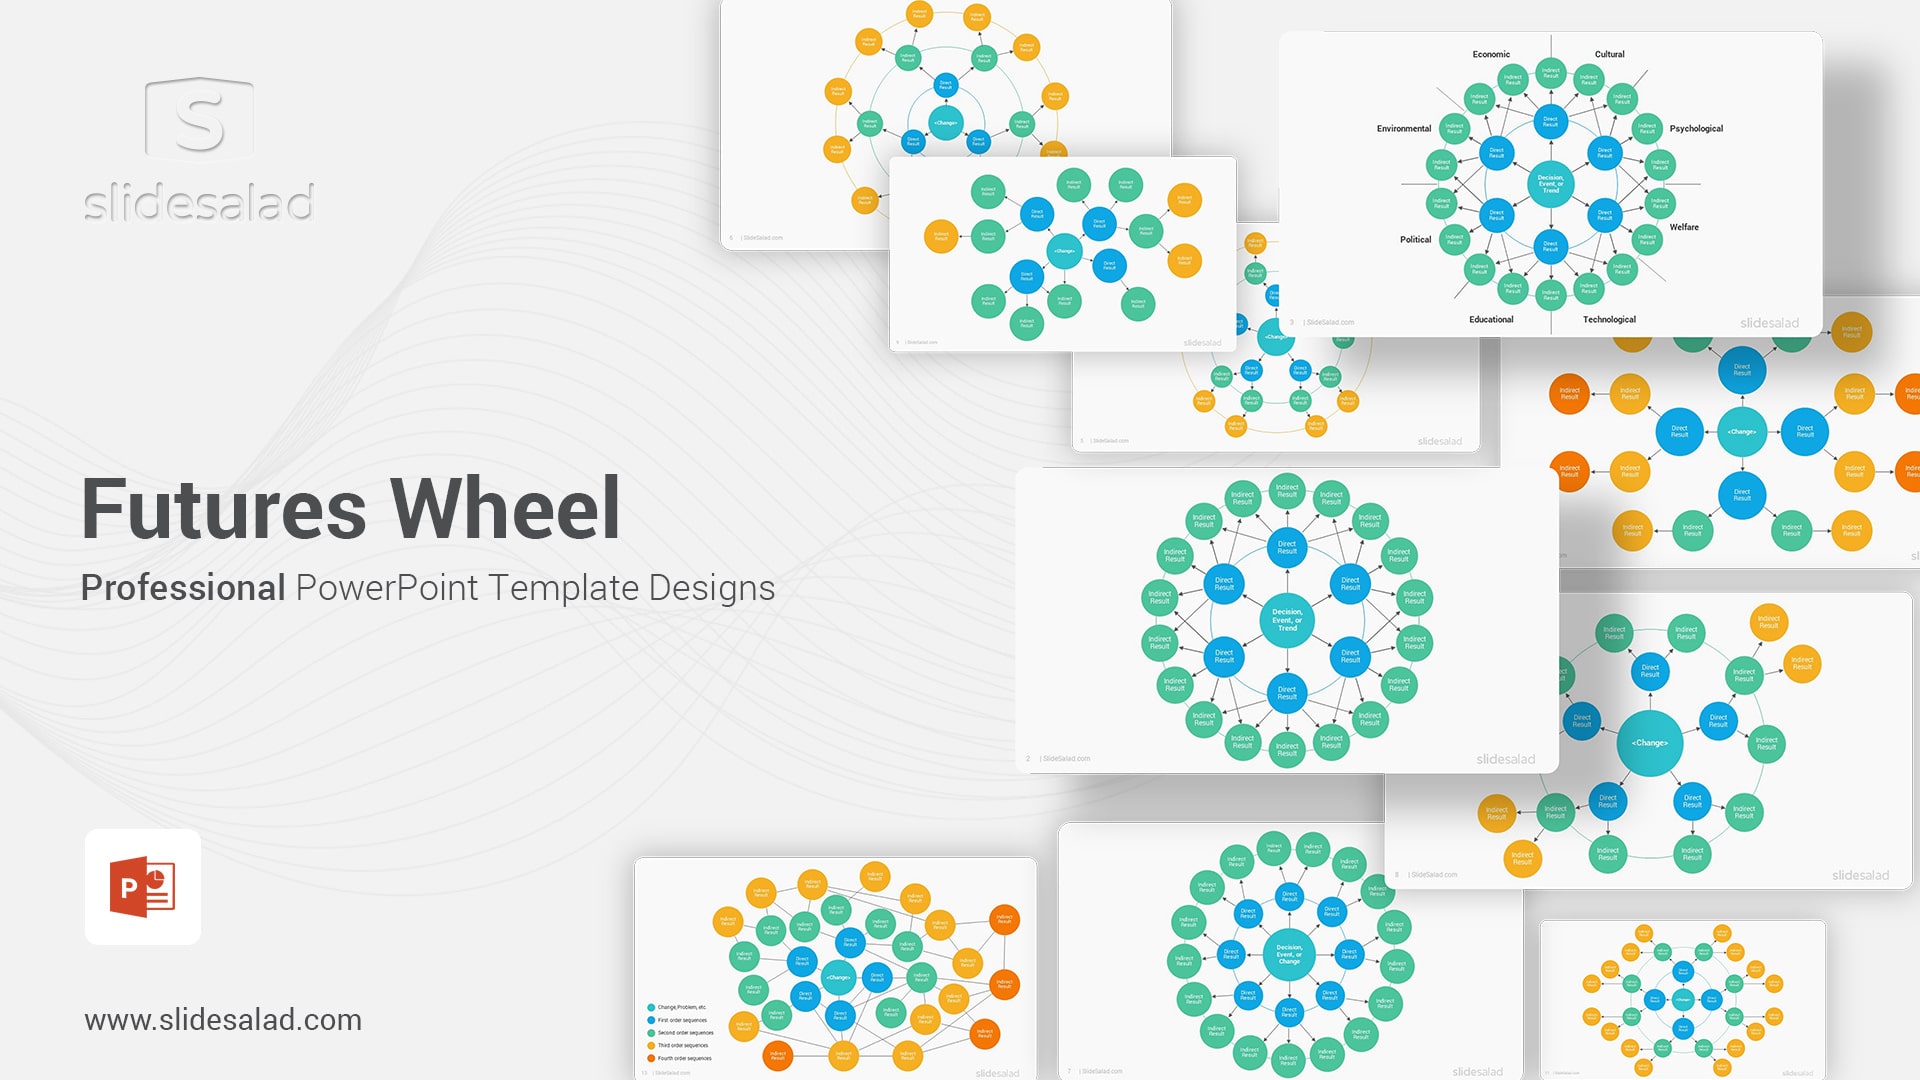 Futures Wheel PowerPoint Template Diagrams - Minimalist PowerPoint Layouts for Presenting Direct and Indirect Consequences of Decision Making